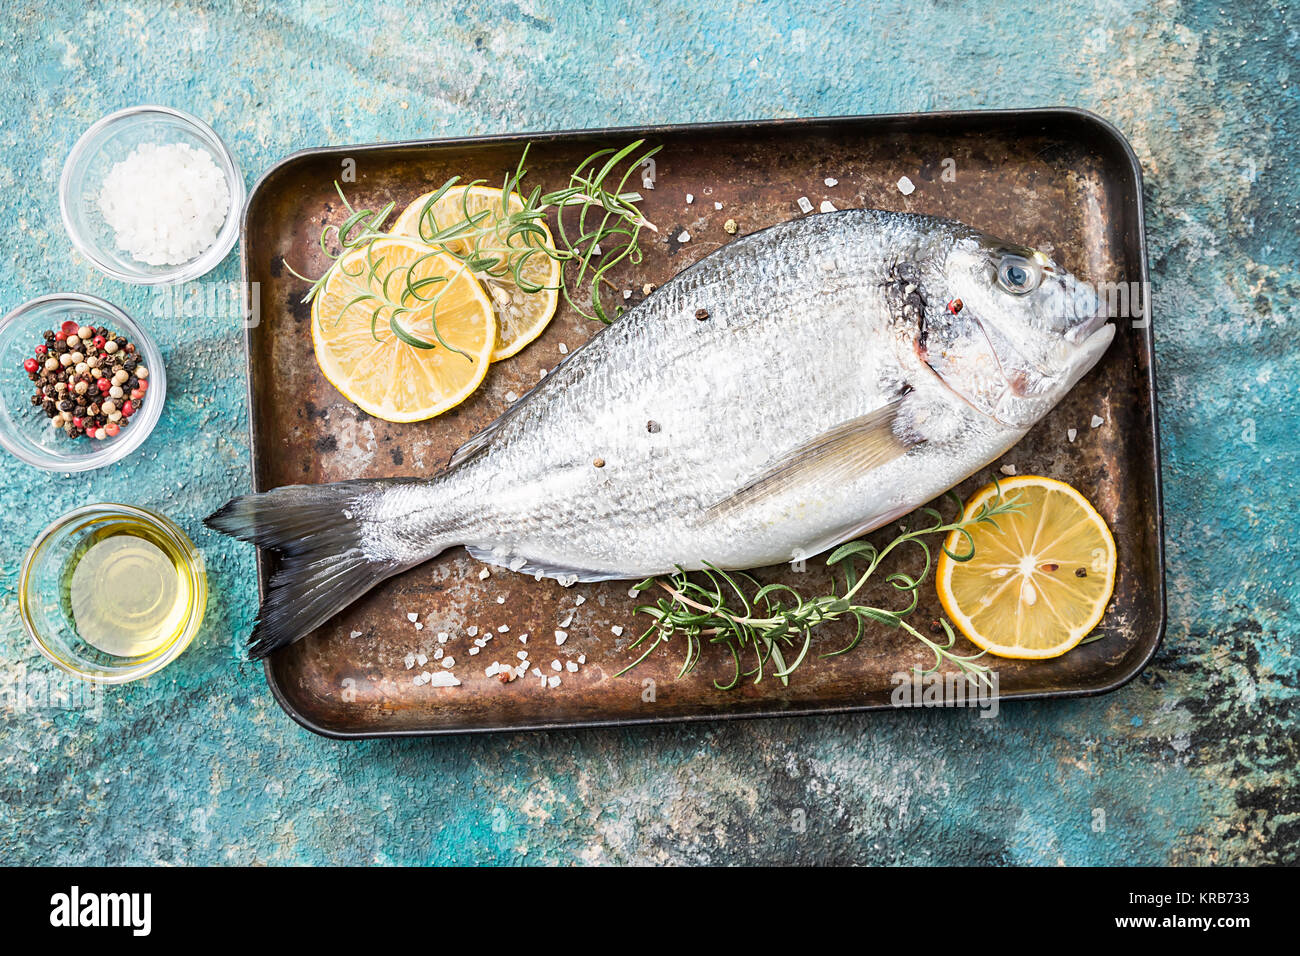 Fresh uncooked dorado or sea bream fish on tray with lemon slices and herbs over blue background, top view Stock Photo